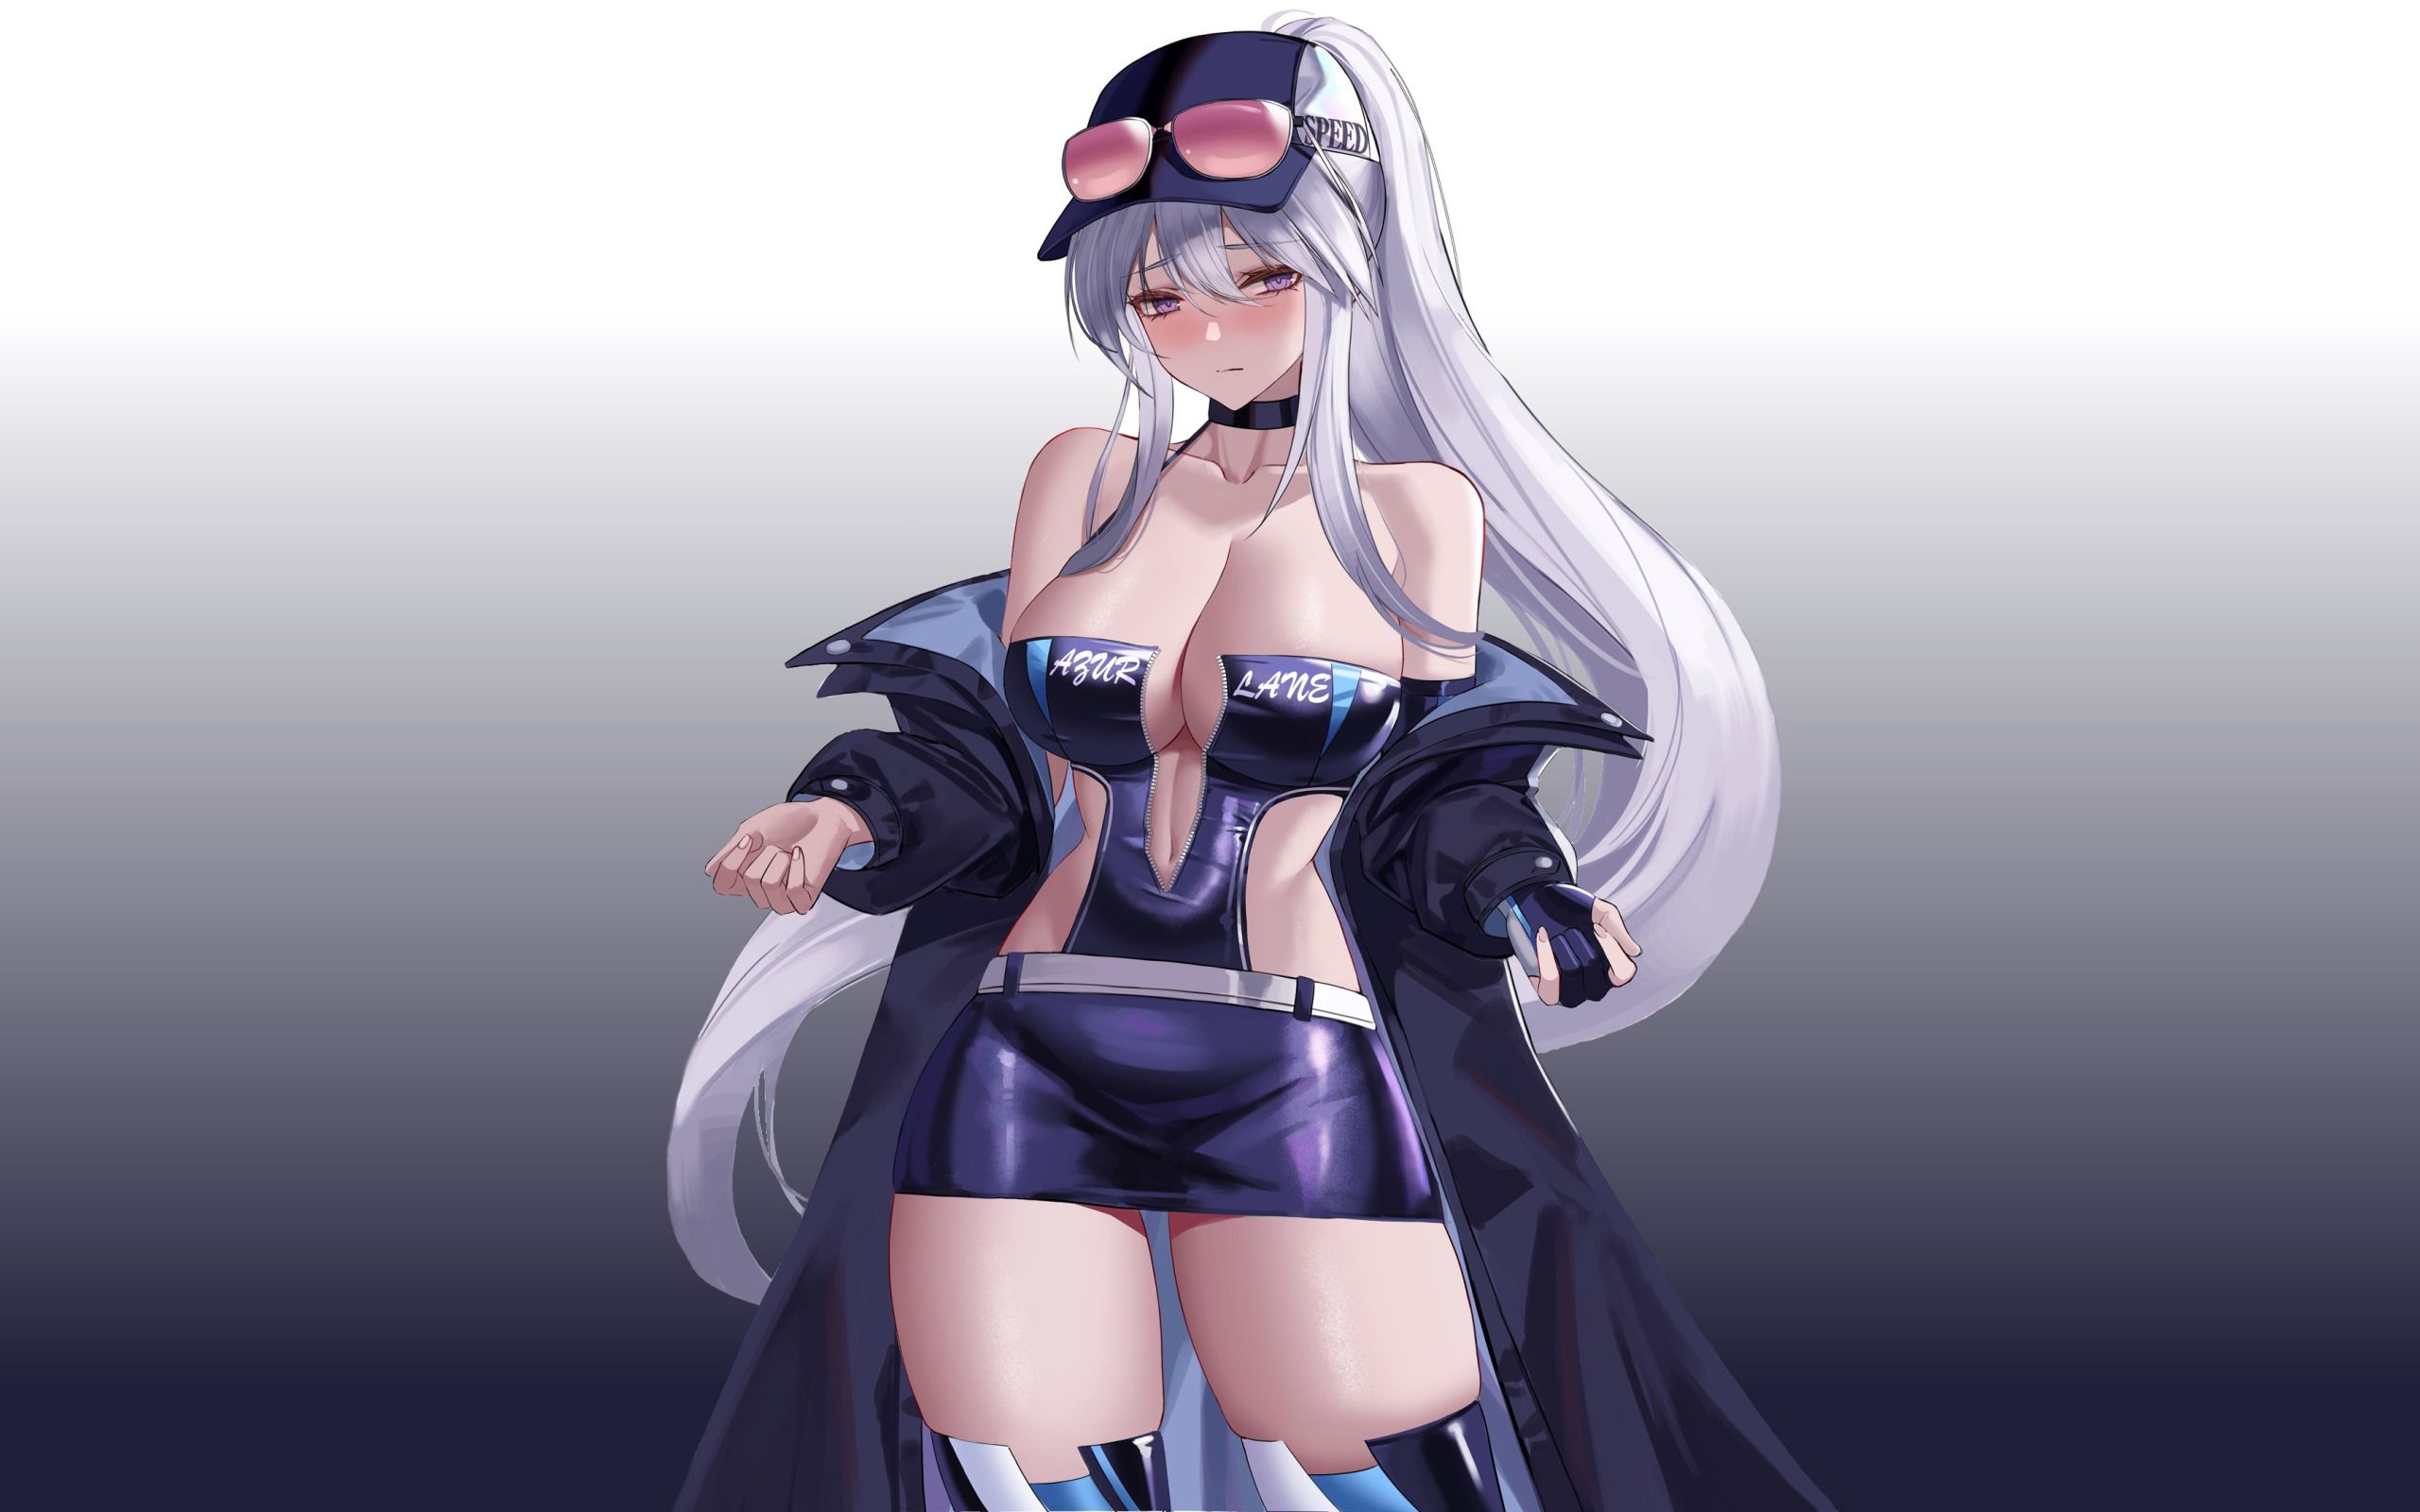 sexy, hat, boobs, anime, pretty, cap, ship, breasts, babe, tight, race quee...